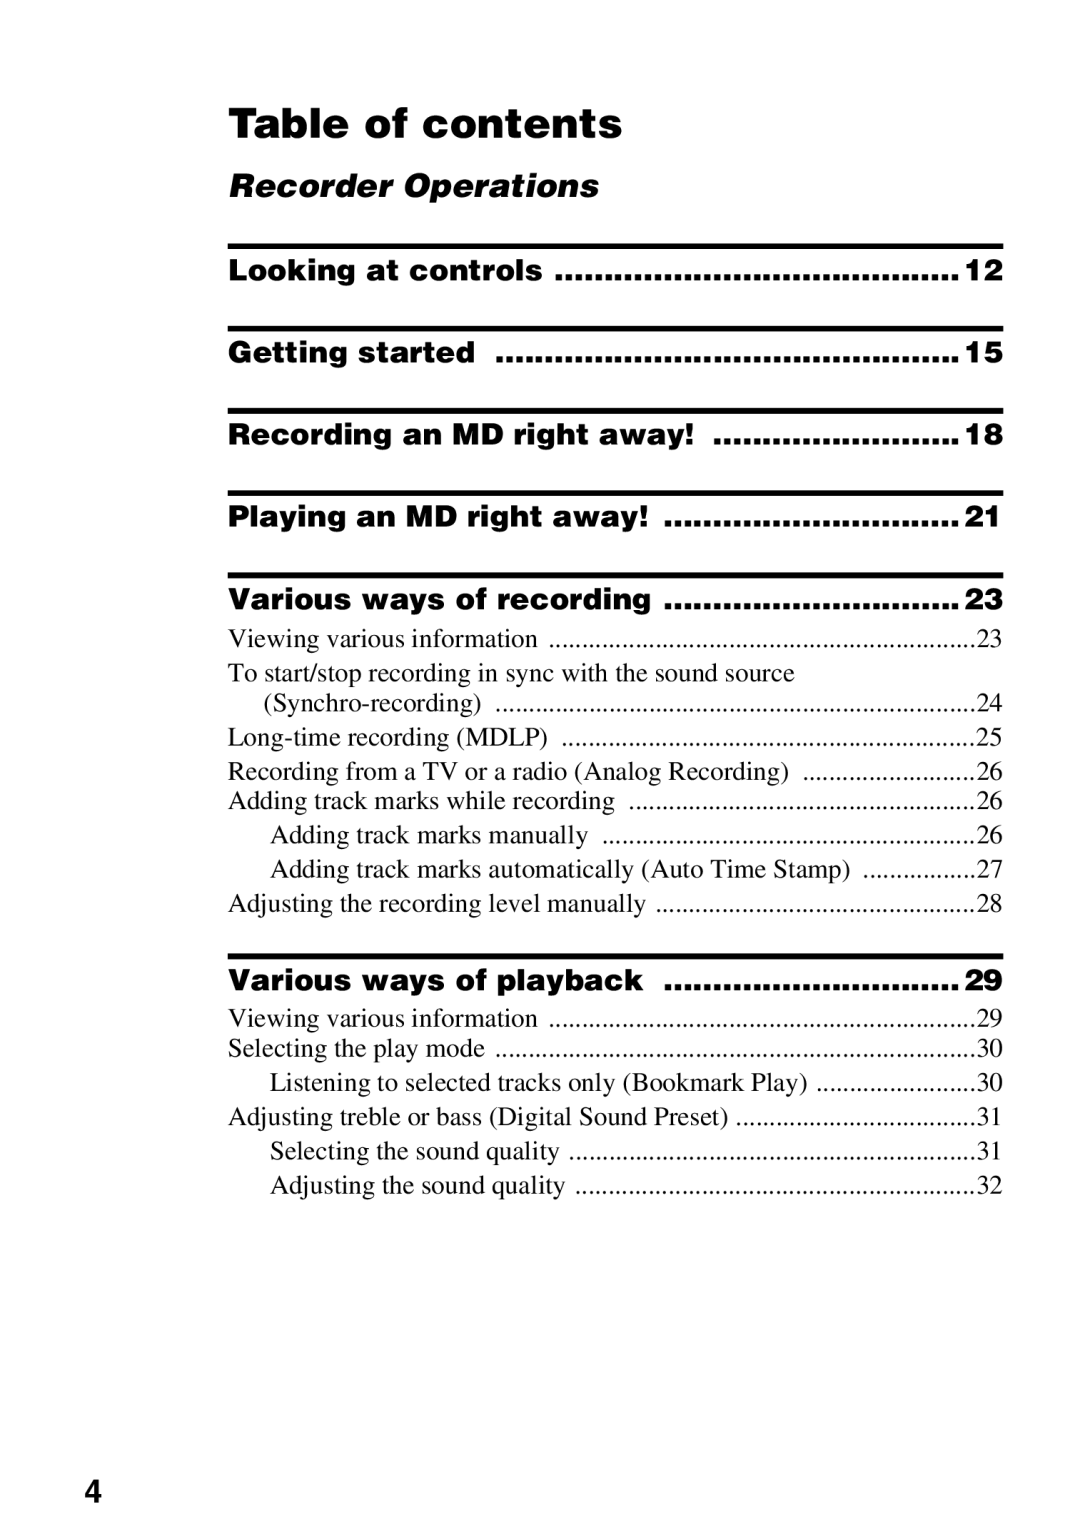 Sony MZ-N510 operating instructions Table of contents, Recorder Operations 